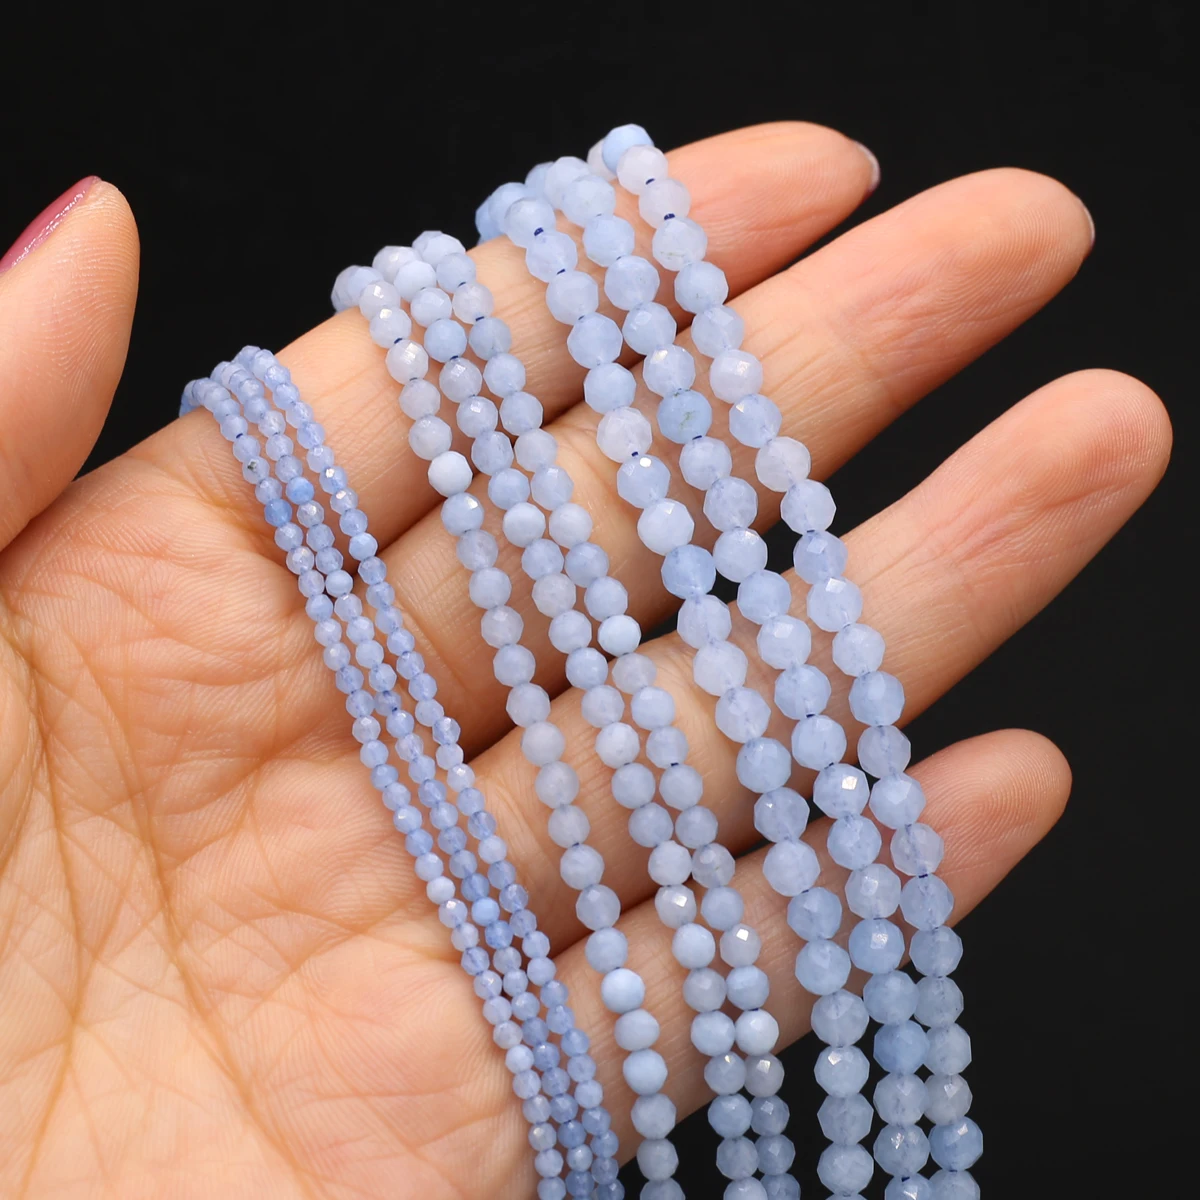 

Natural Stone Beads Small Section Bead Amazonite 2 3 4mm Loose beads for Jewelry Making DIY Bracelet Necklace Length 38cm